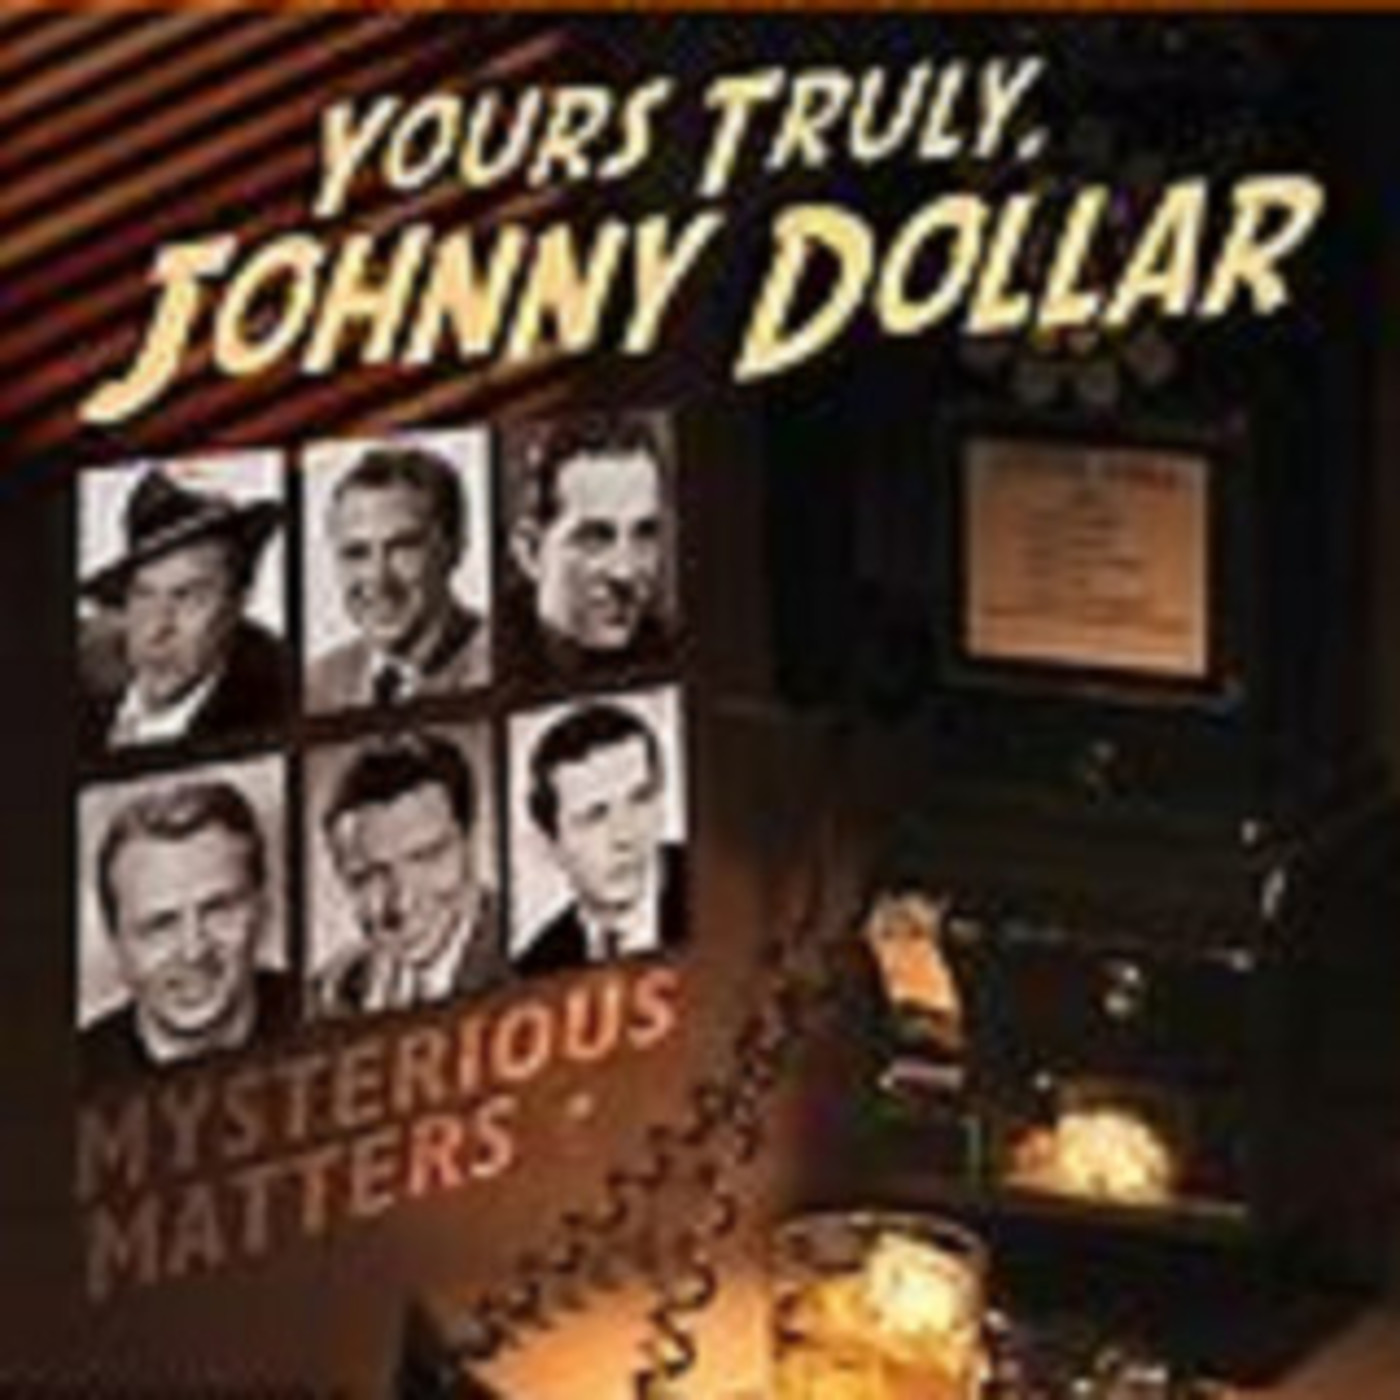 Yours Truly, Johnny Dollar - 102261, episode 763 - The Three for One Matter